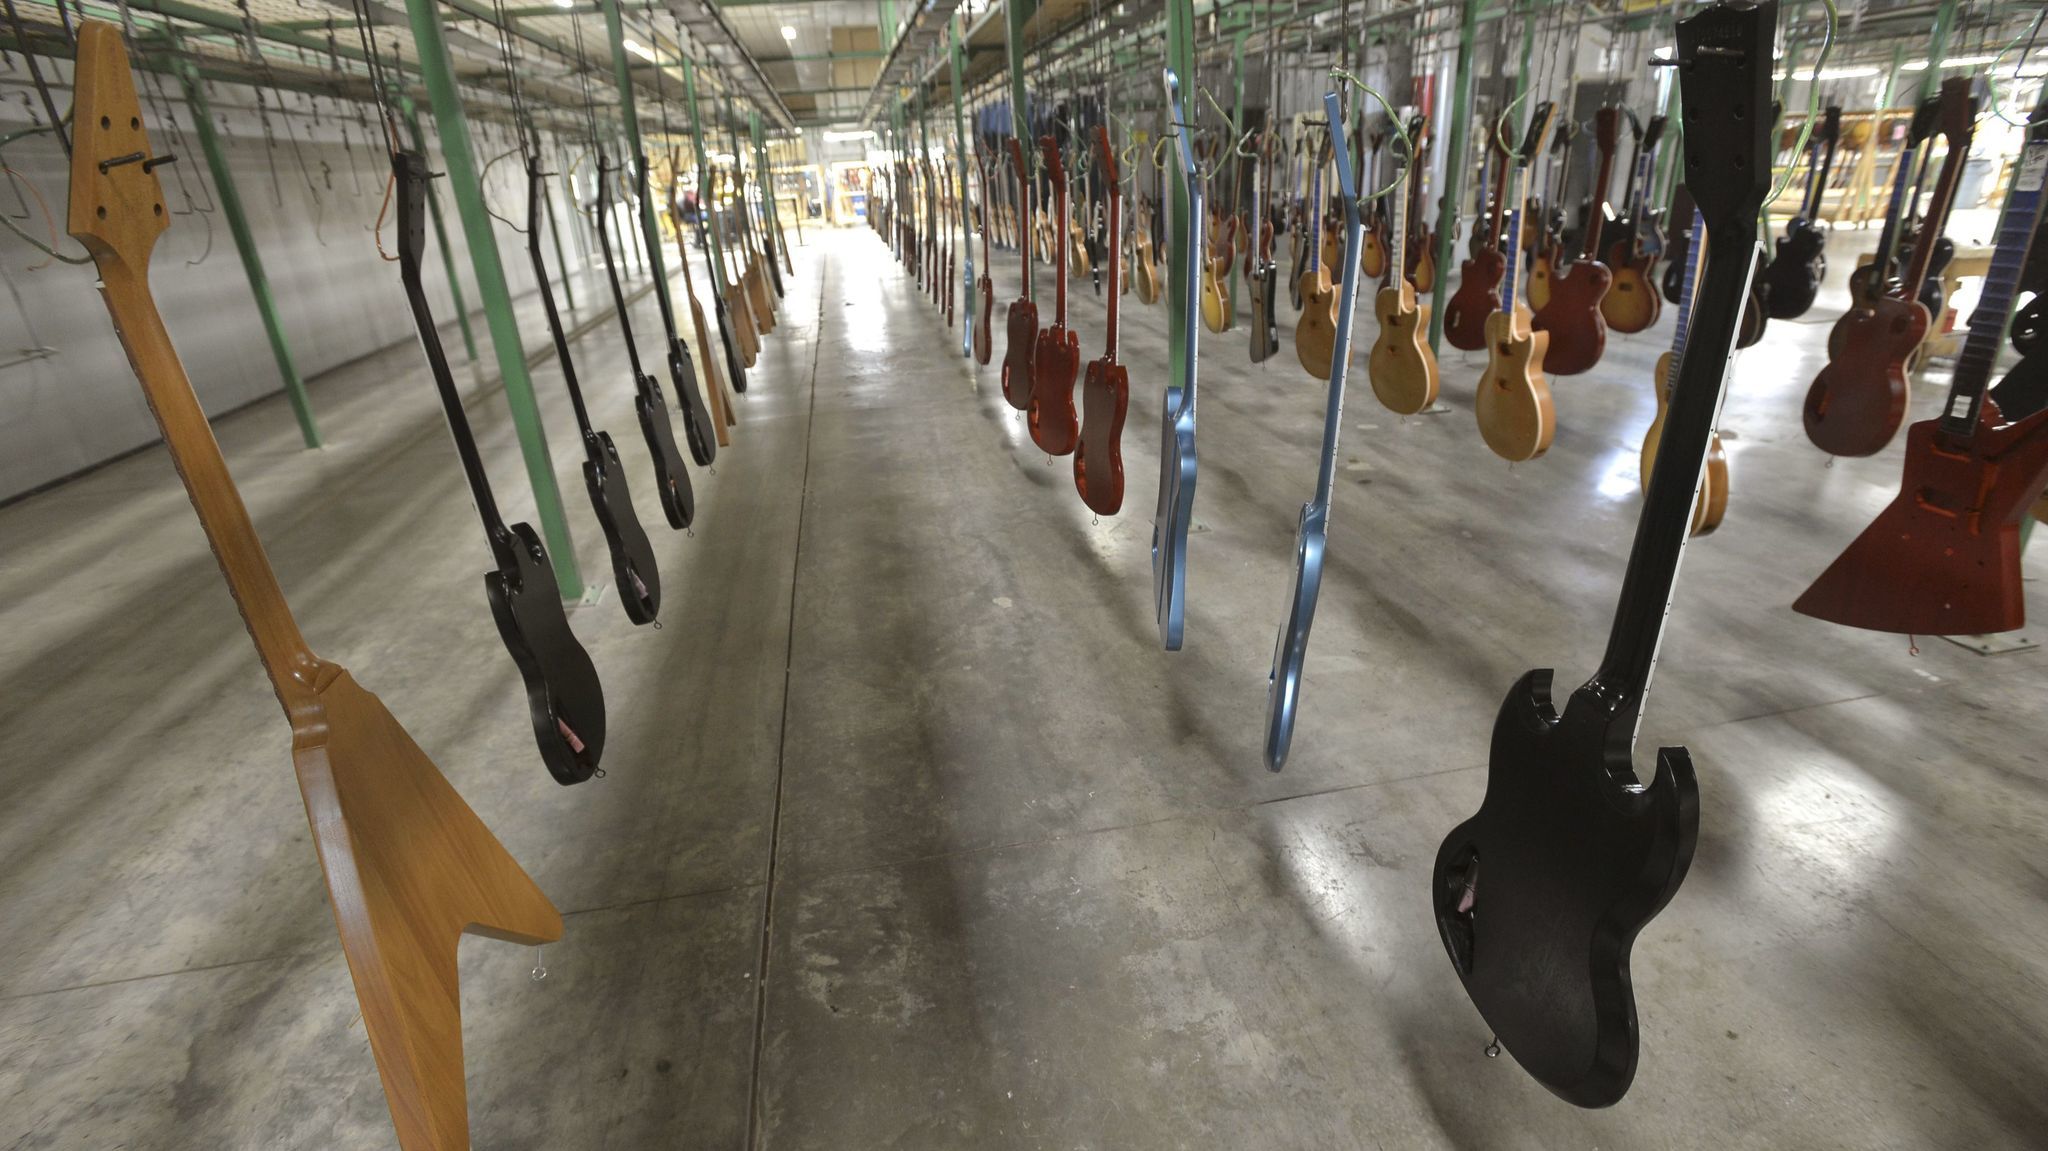 New guitars hang, waiting to have final finish applied at the Gibson guitar manufacturing plant in Nashville.